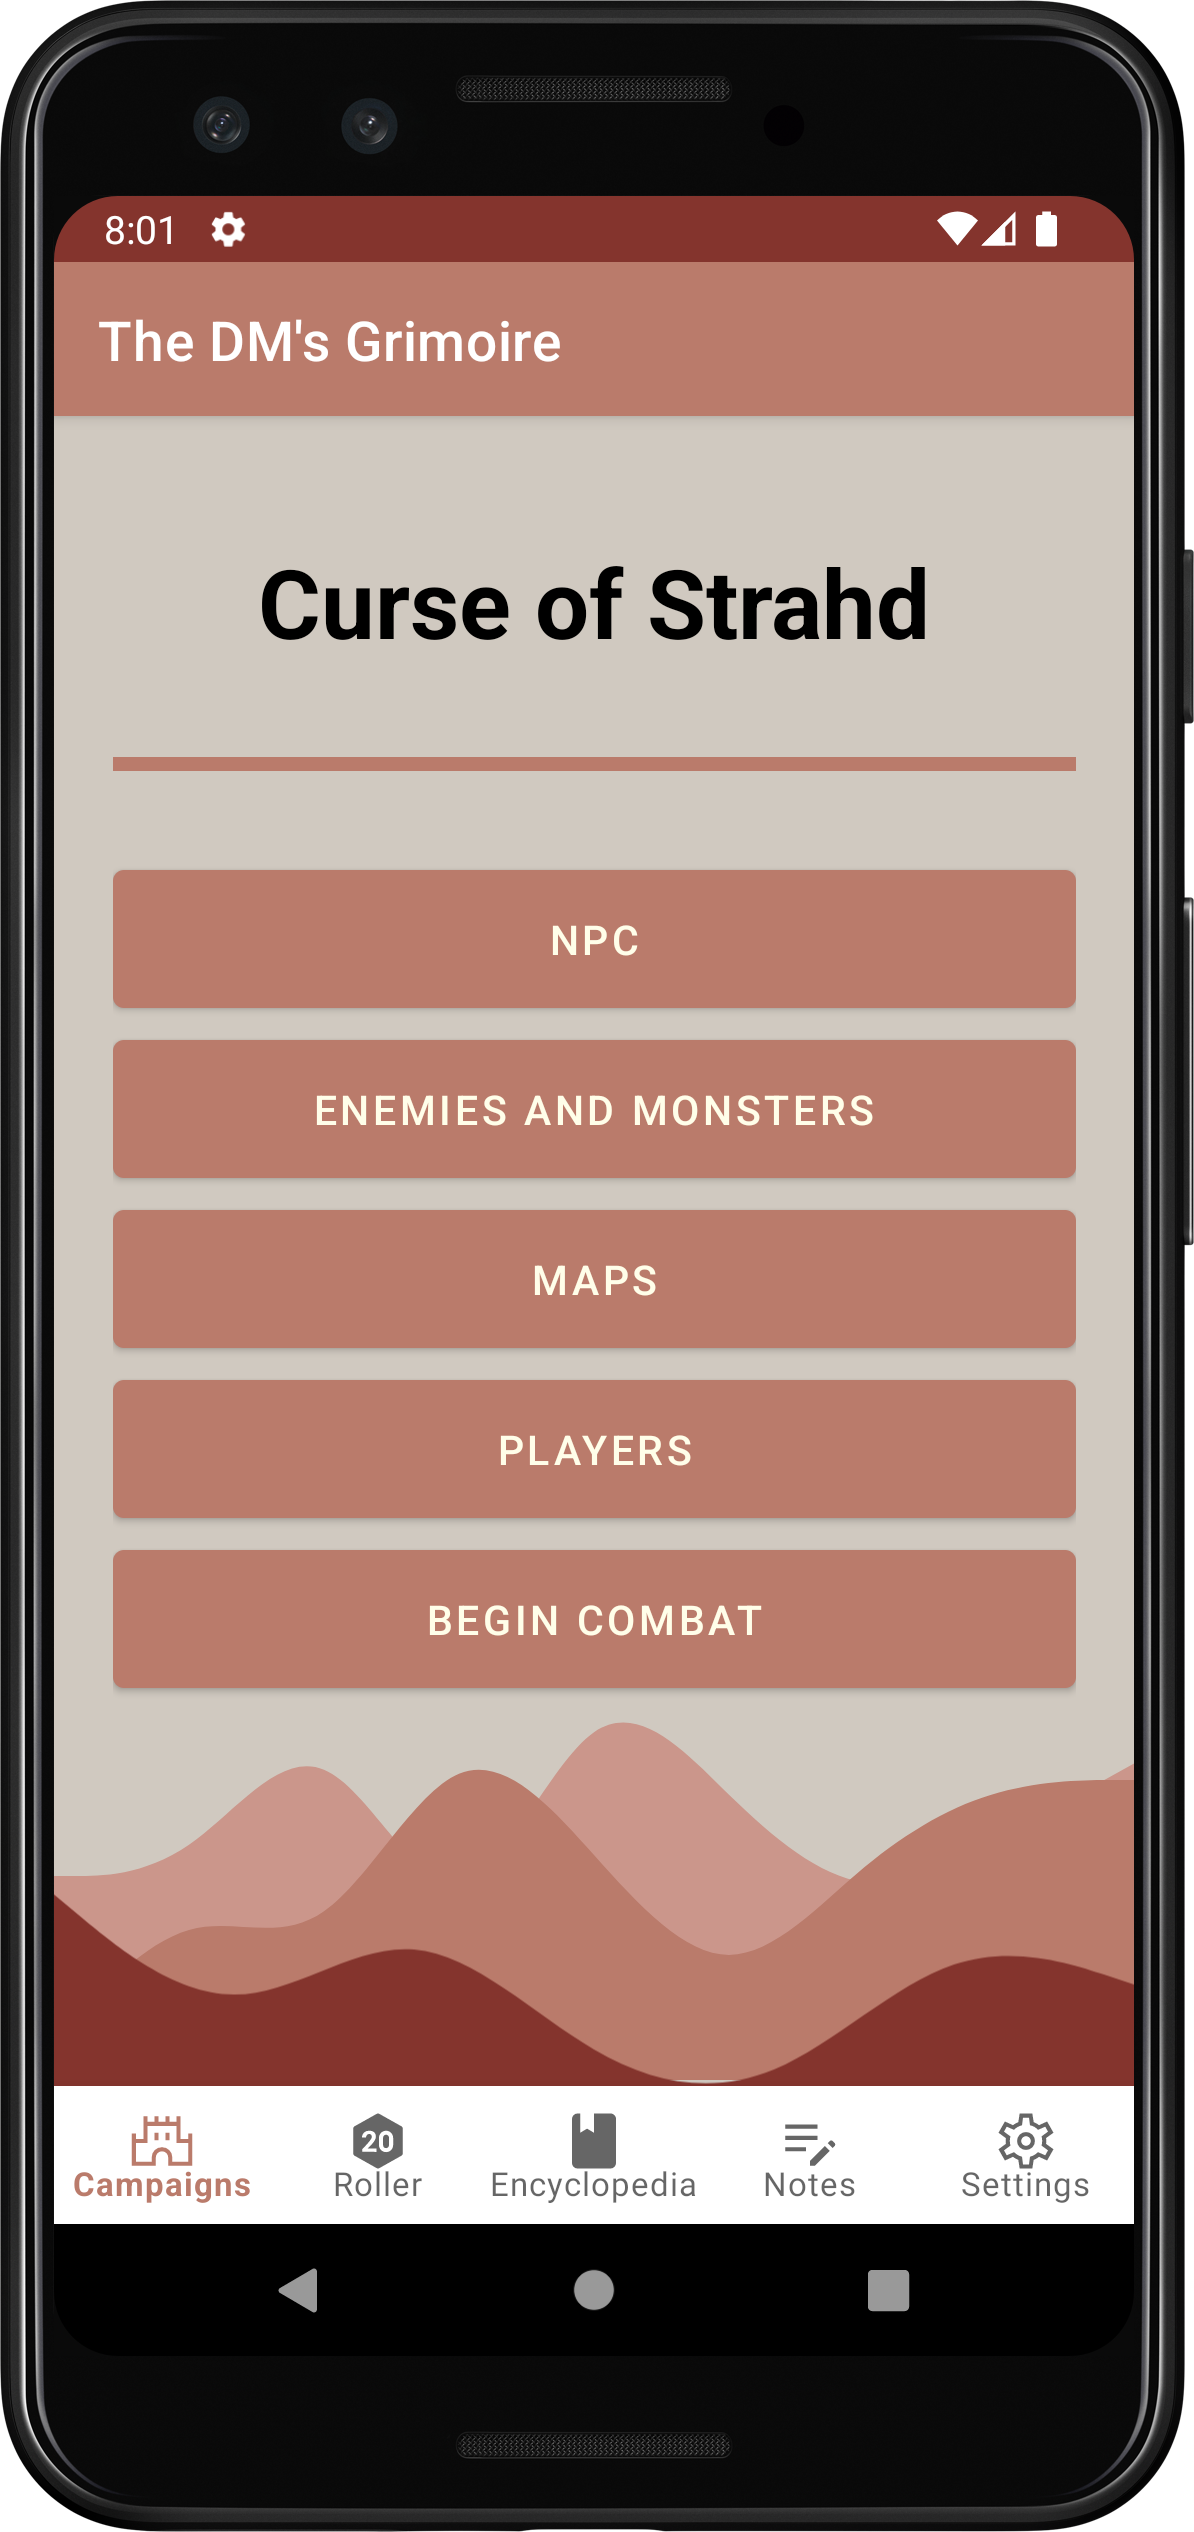 The campaings detail page. This page allows access to the campaign's specific attributes, like the players, NPCs, enemies, etc..